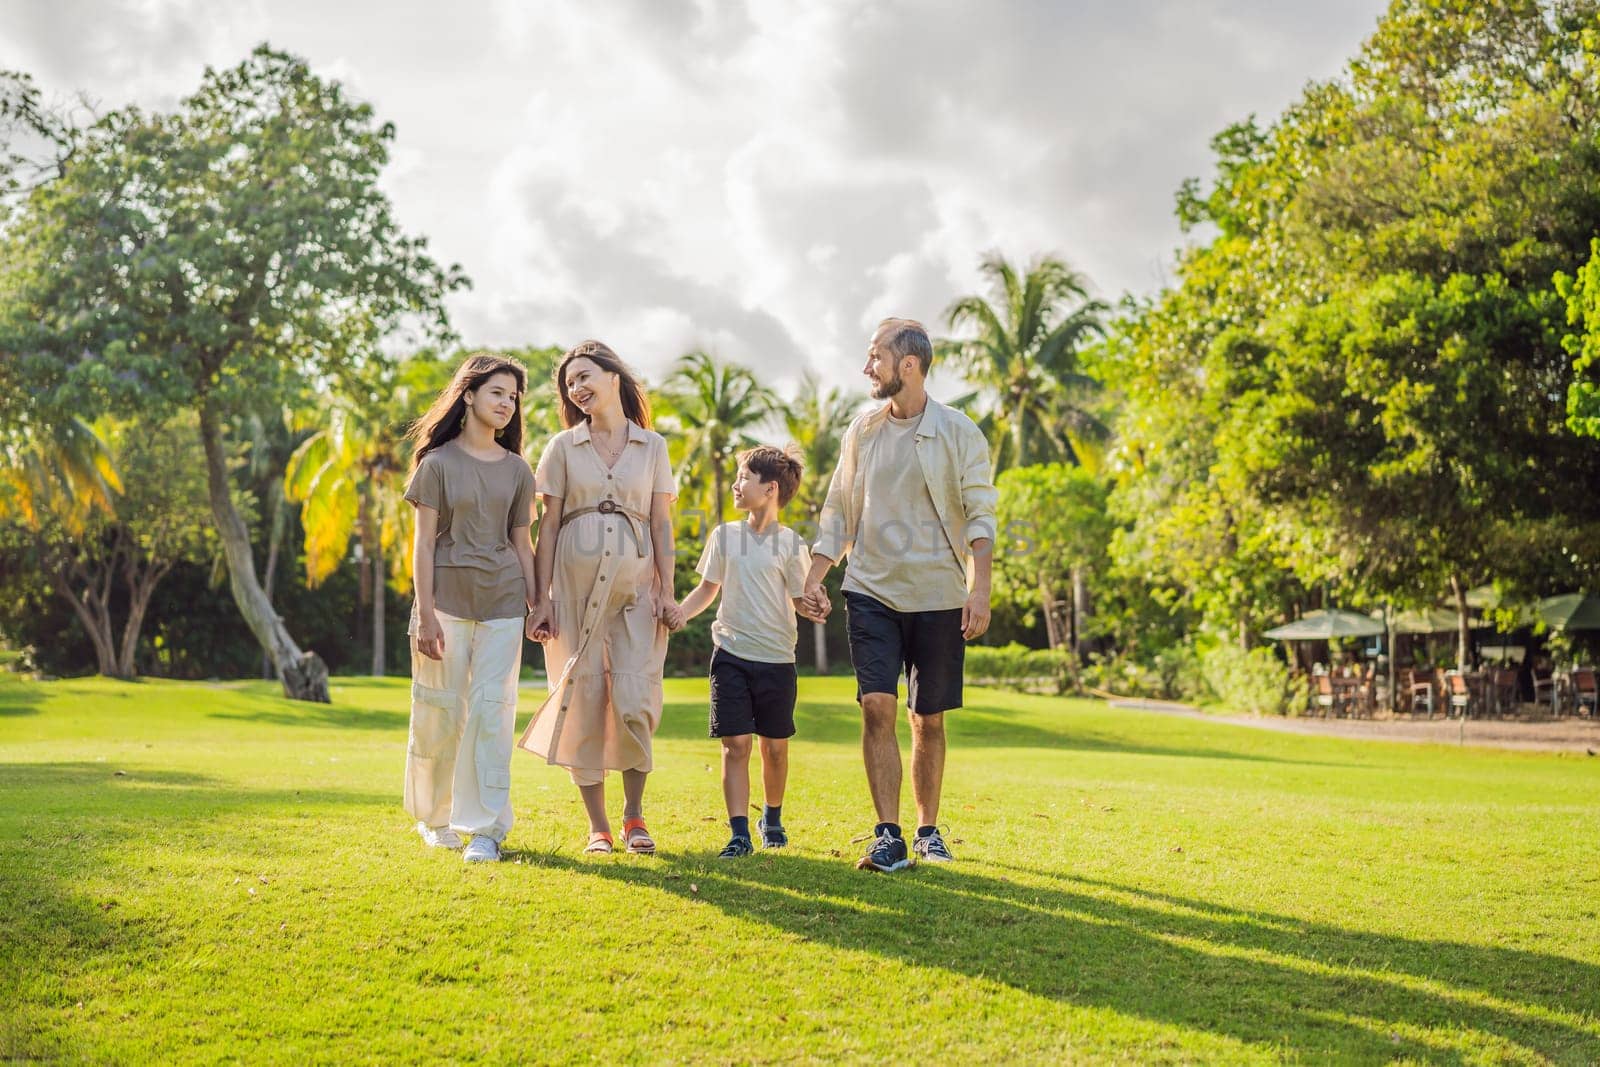 A loving family enjoying a leisurely walk in the park - a radiant pregnant woman after 40, embraced by her husband, and accompanied by their adult teenage children, savoring precious moments together amidst nature's beauty. Pregnancy after 40 concept.